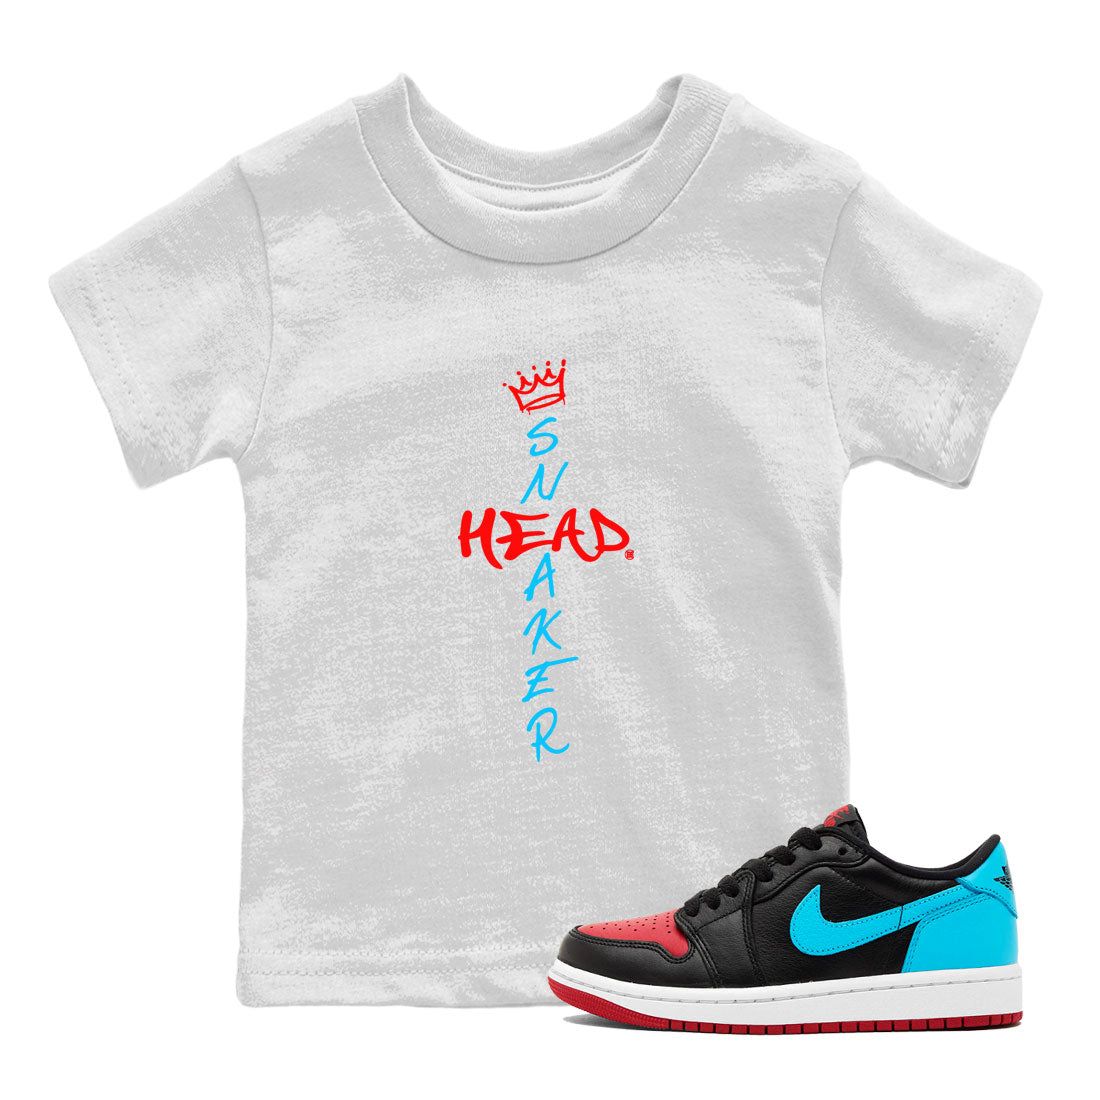 Air Jordan 1 UNC to Chicago Sneaker Match Tees Cross Sneakerhead Streetwear Sneaker Shirt Jordan 1 Low OG WMNS UNC to Chicago Drip Gear Zone Sneaker Matching Clothing Kids and Baby Youth Shirts White 1